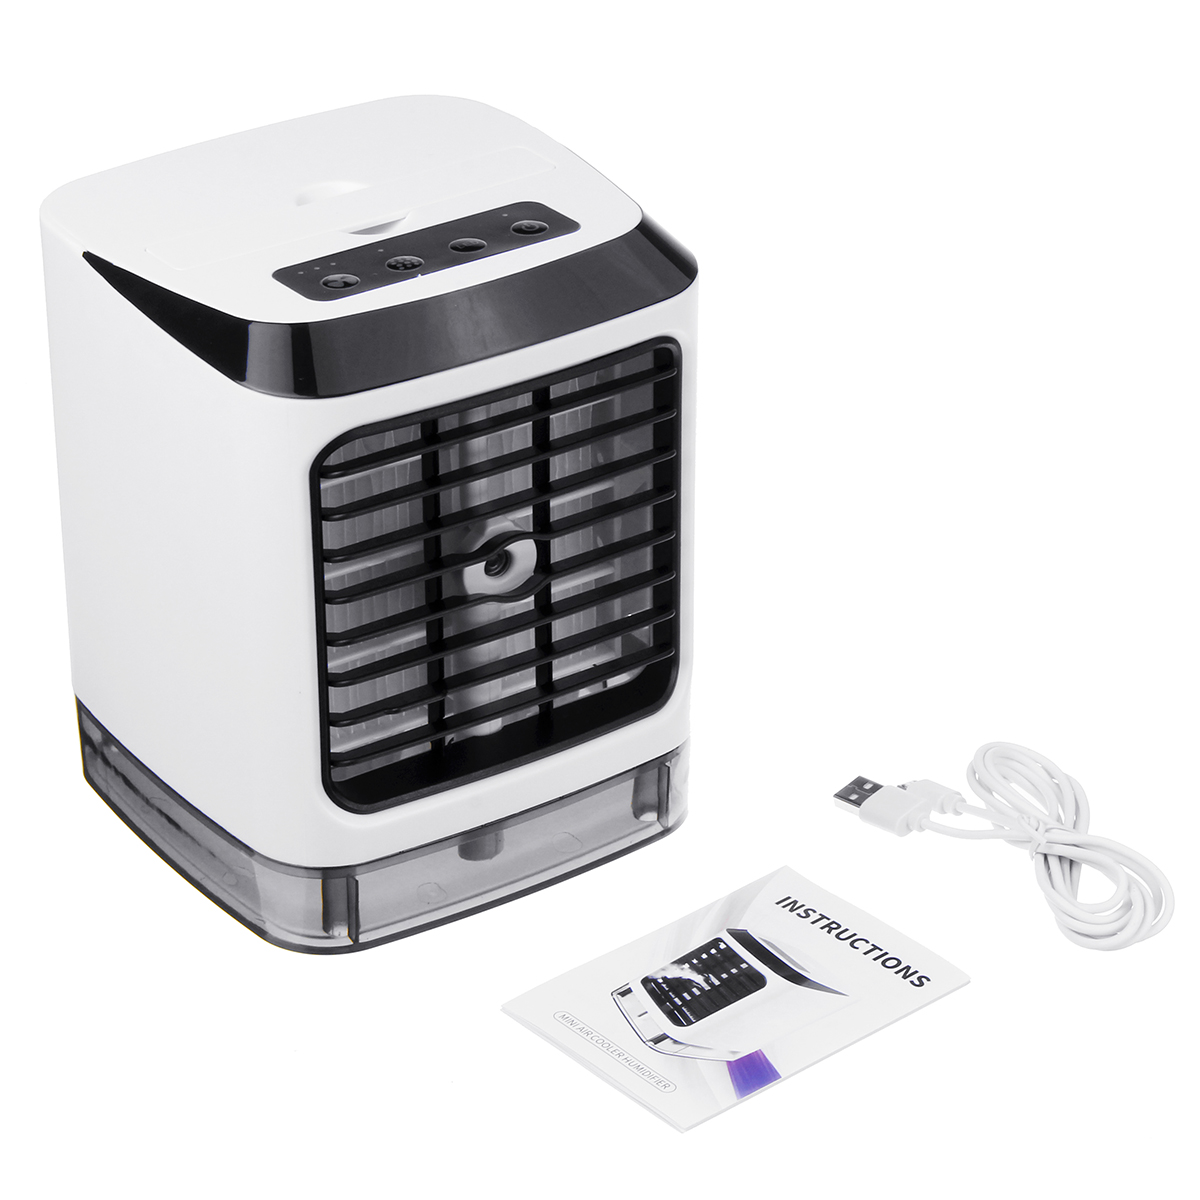 LED-480mL-Personal-Evaporative-Air-Cooler-Humidifier-Portable-Air-Conditioner-Mist-Prayer-USB-Cooler-1479420-7